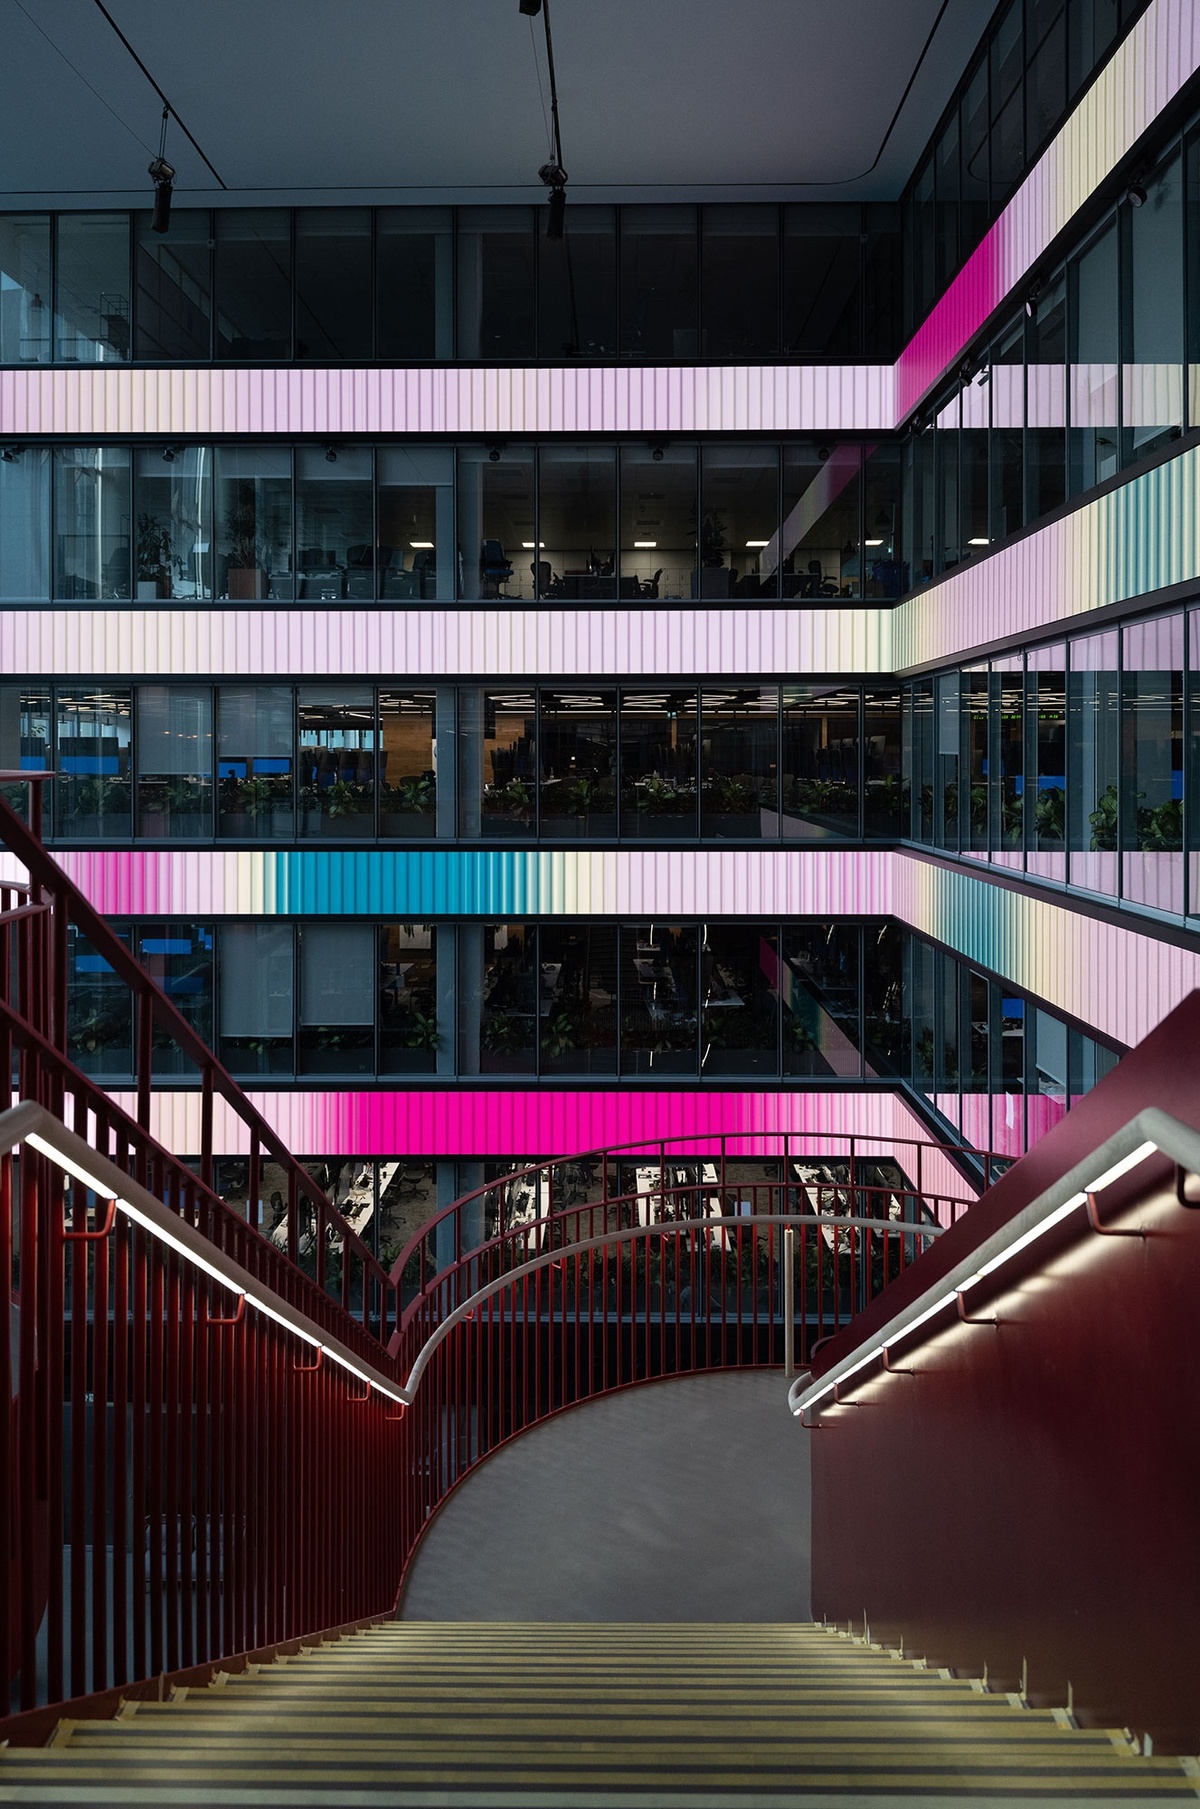 View from top of stairwell, overlooking installation in the atrium of four long LED screens between four floors of the building, with pink, green and blue gradients